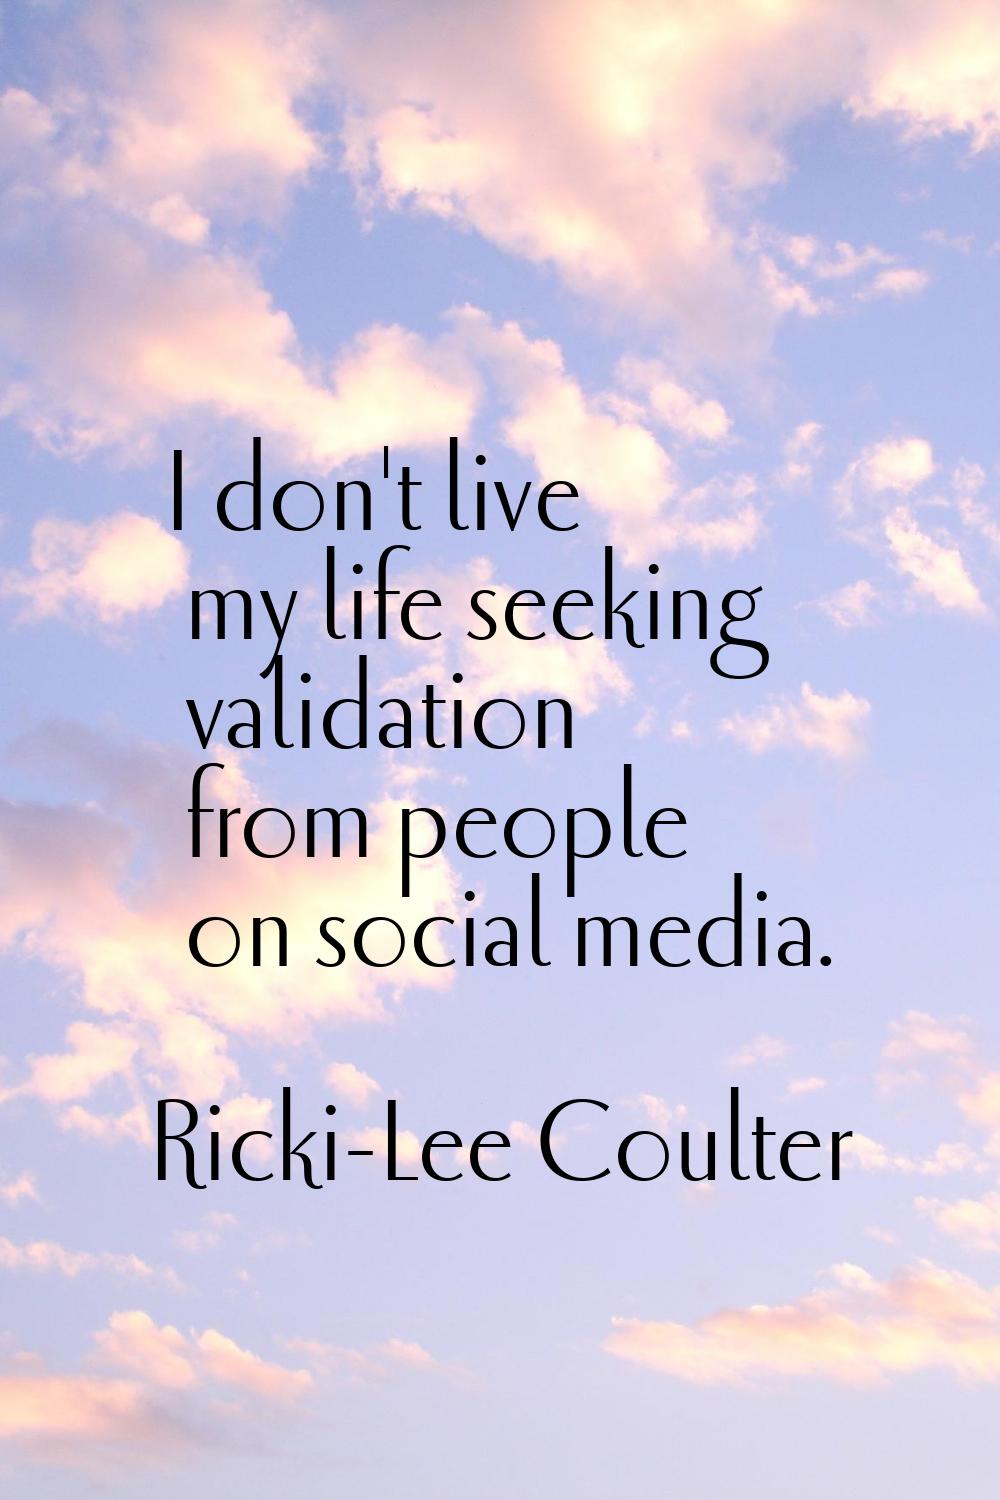 I don't live my life seeking validation from people on social media.